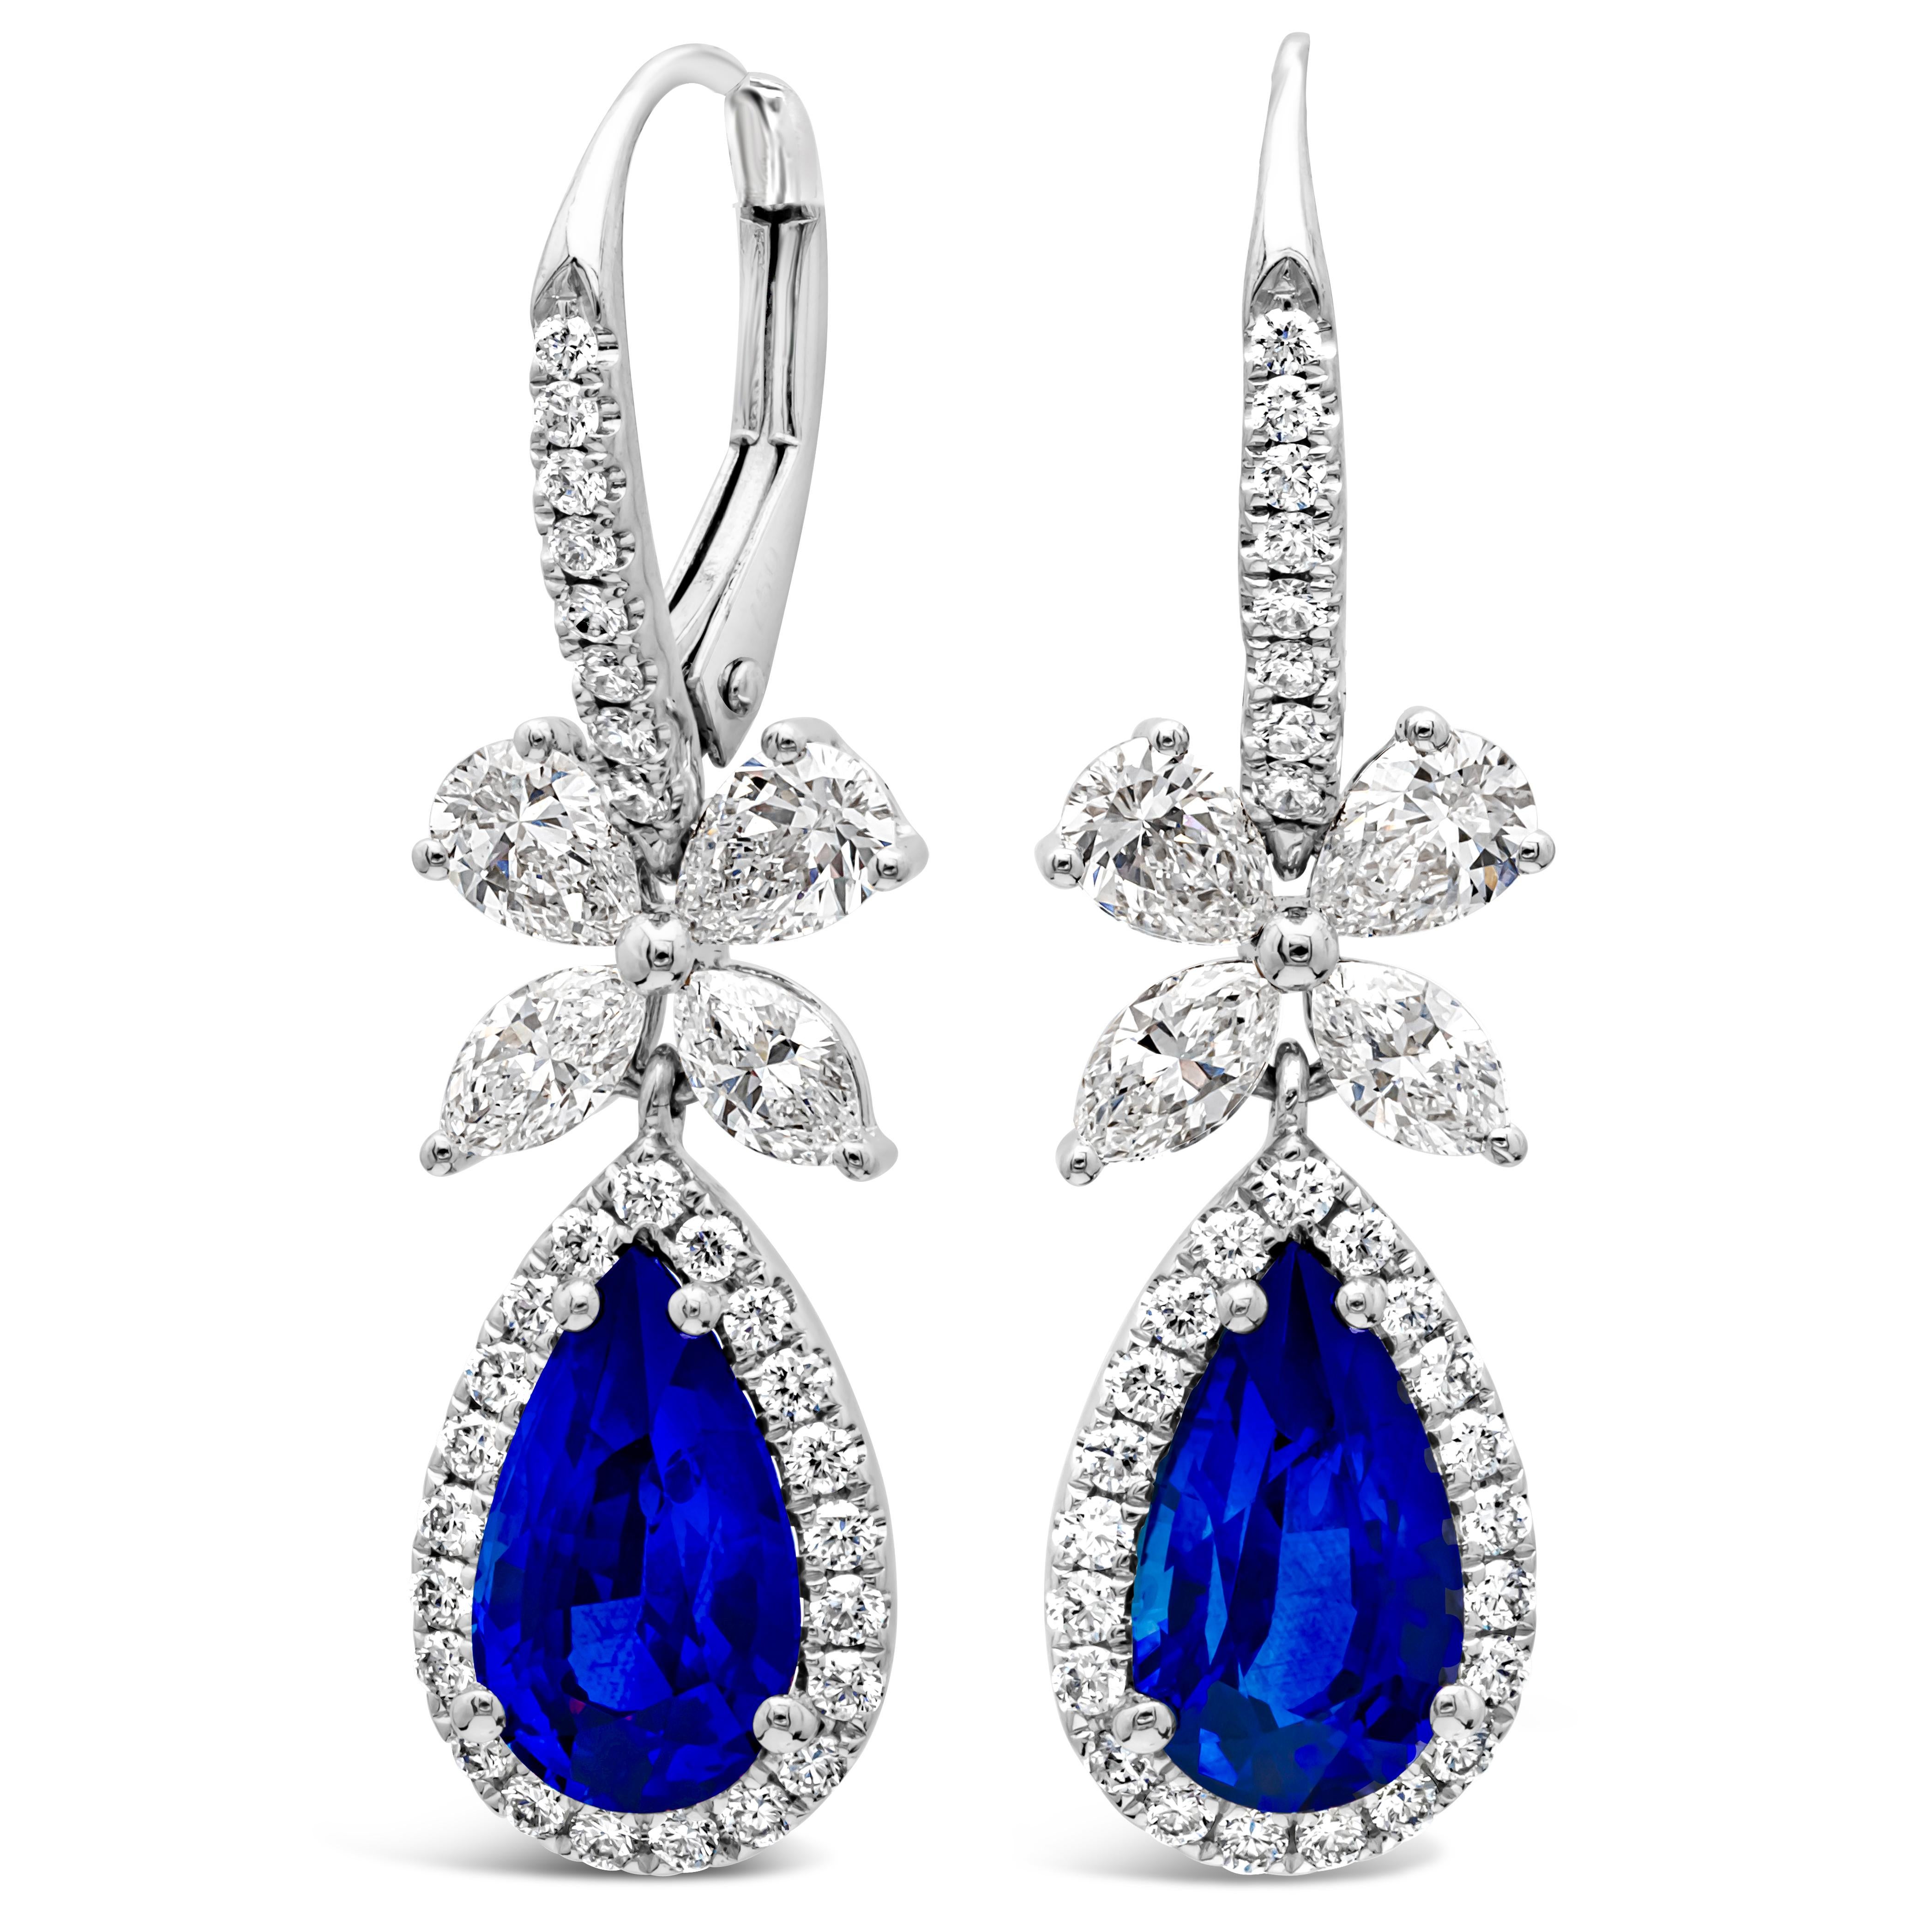 These gorgeous pair of dangle earrings feature a pear shape color-rich blue sapphire in the center weighing 2.69 carats total, surrounded by a row of brilliant round diamonds in a halo design. A bow-like figure made with diamonds hang on top of the